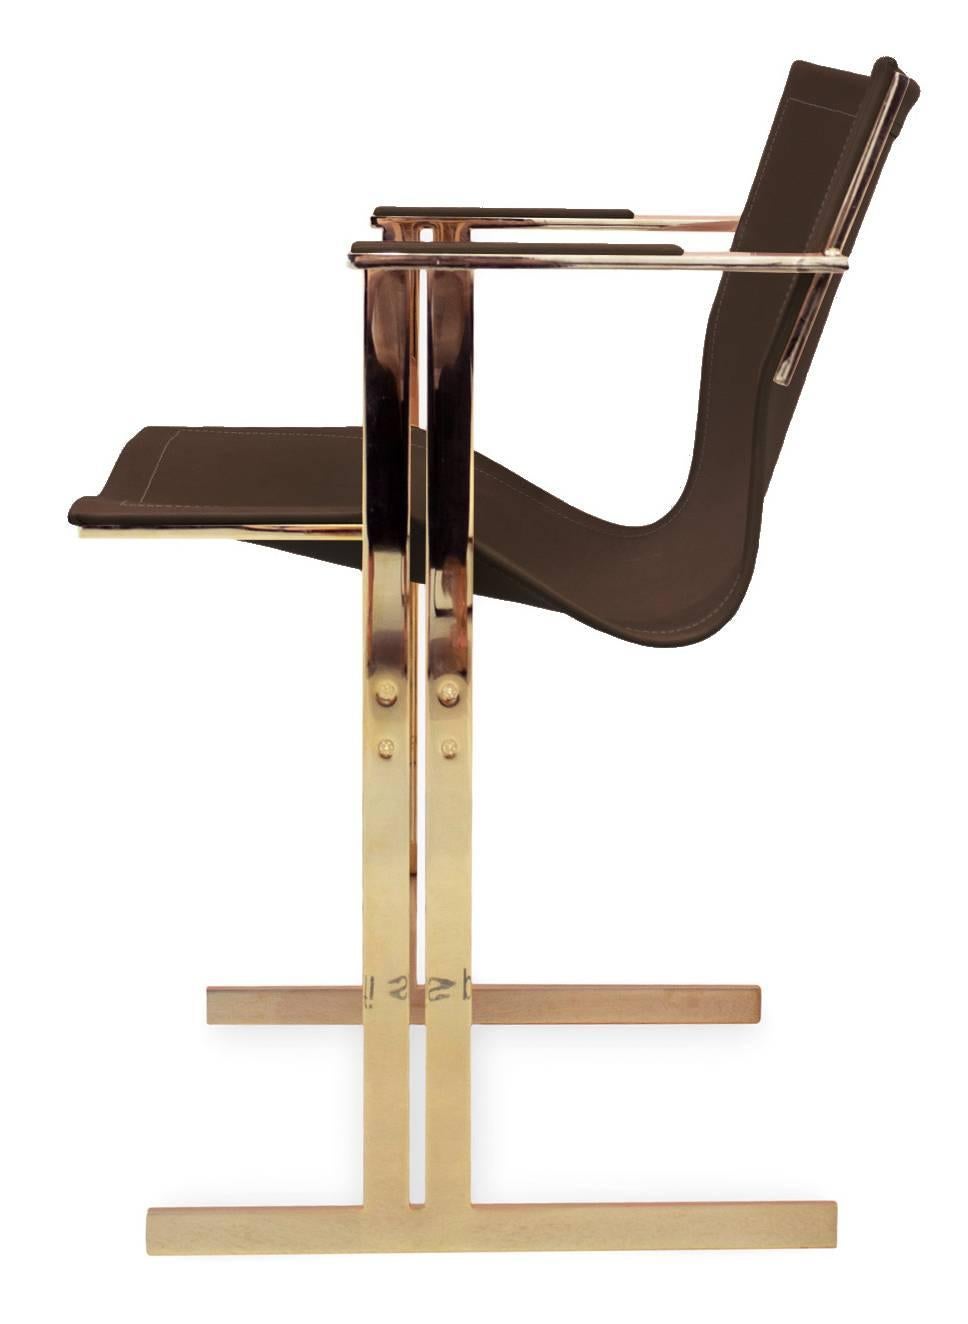 Kolb chair

Measures: W 24.4” / 62 cm
L 22” / 56 cm
H 18.8 and 32.3” / 48 and 77 cm
Steel-plated and core leather

Individuality

Choose your own color combination - Please, do not hesitate to contact us and get more information regarding a